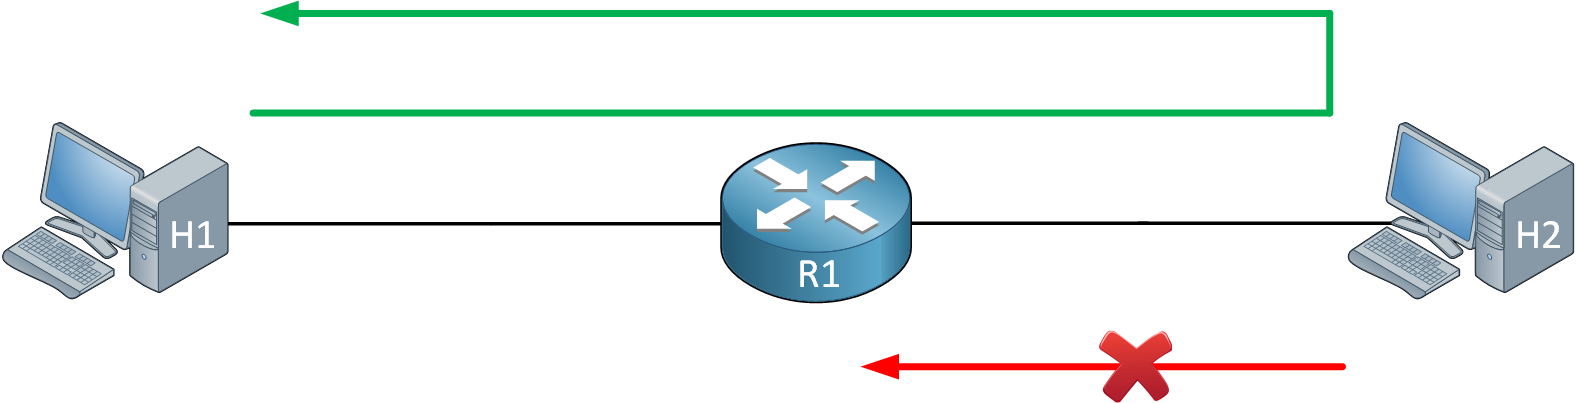 H1 H2 R1 Acl Established Topology